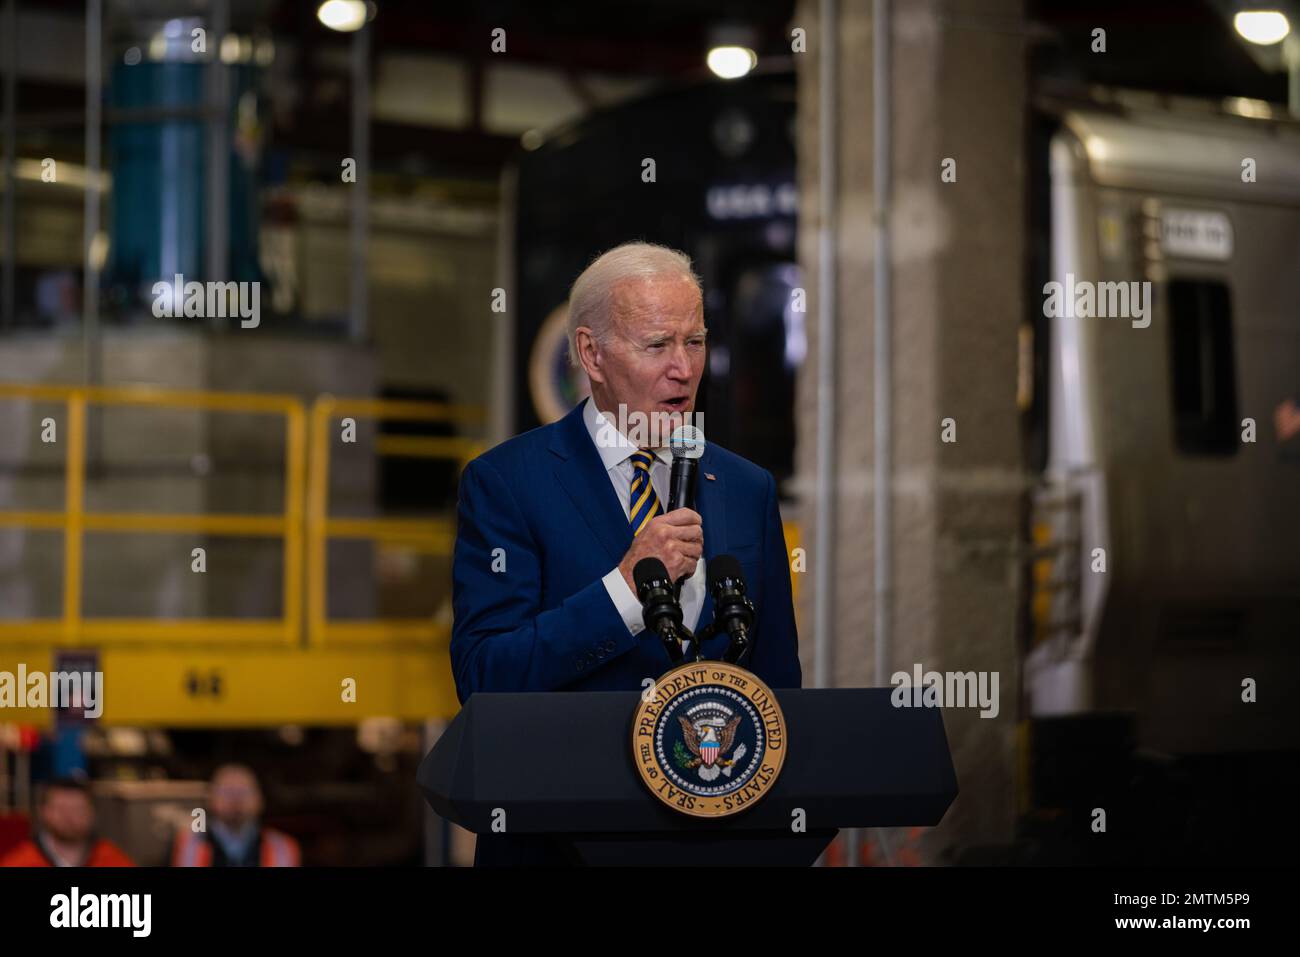 The President of the United States Joe Biden visits New York City on January 31, 2023 to announce funding for Gateway Hudson Tunnel project funded by bipartisan infrastructure law. (Photo by Steve Sanchez/Sipa USA) Stock Photo